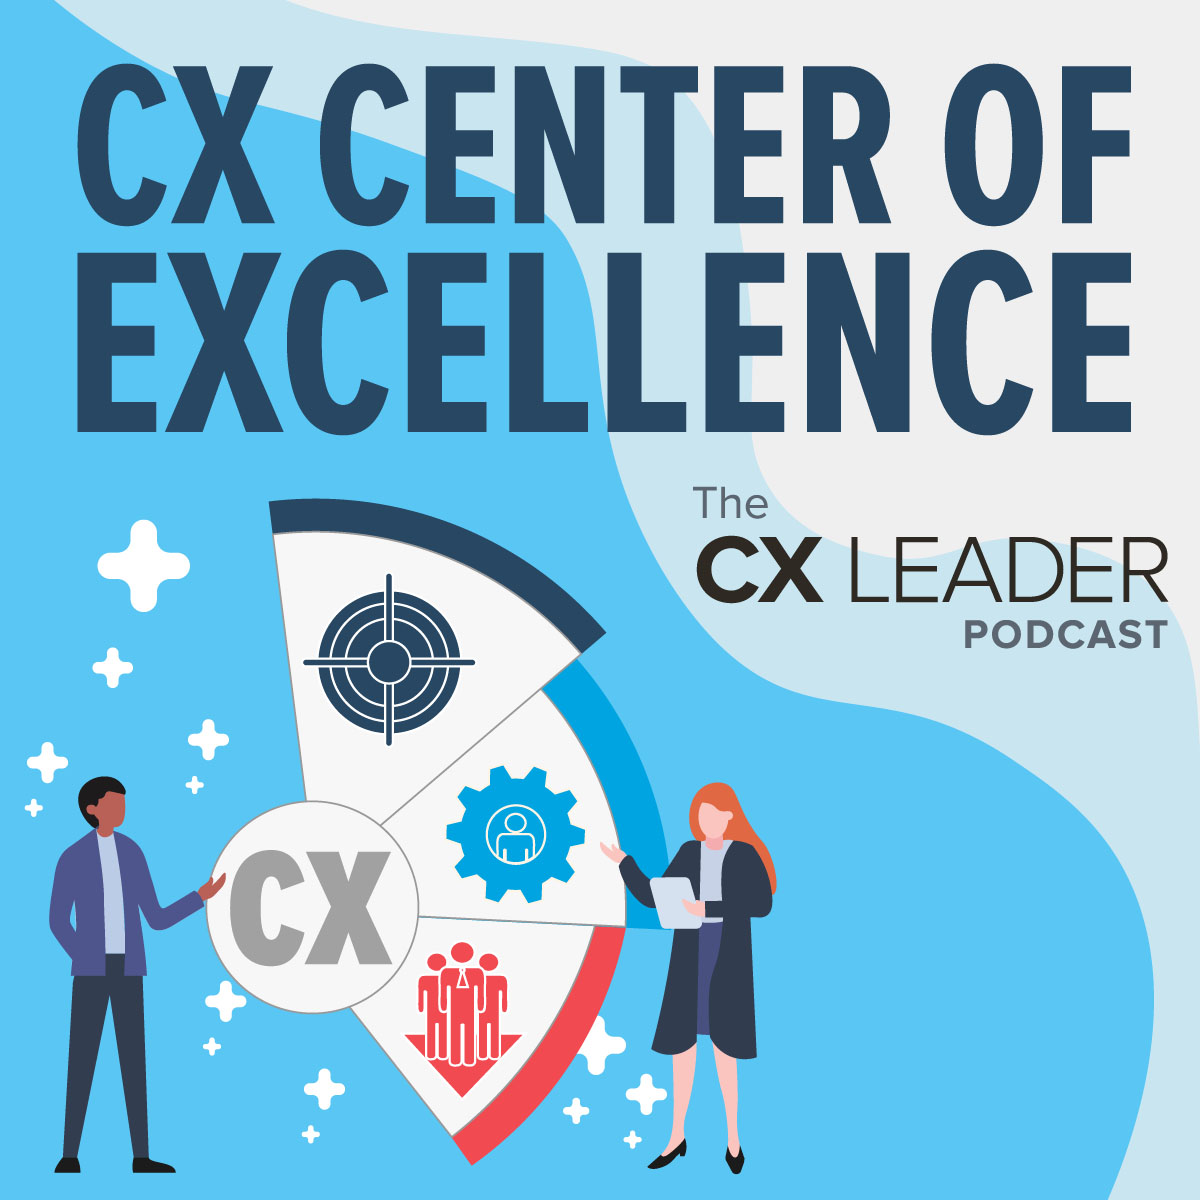 CX Center of Excellence